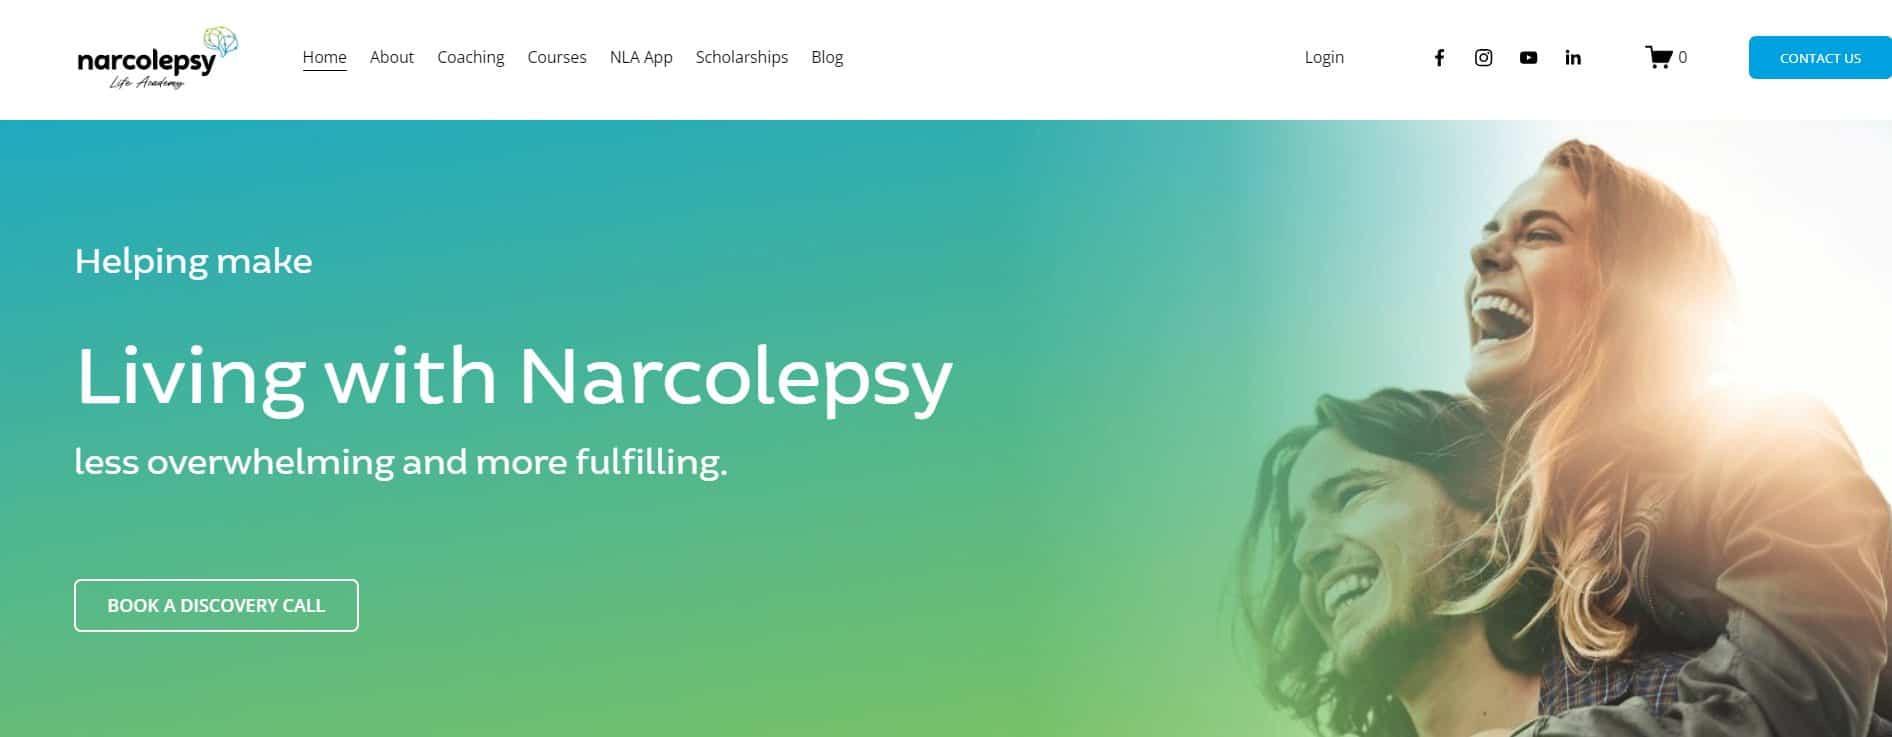 Narcolepsy Life Academy home page